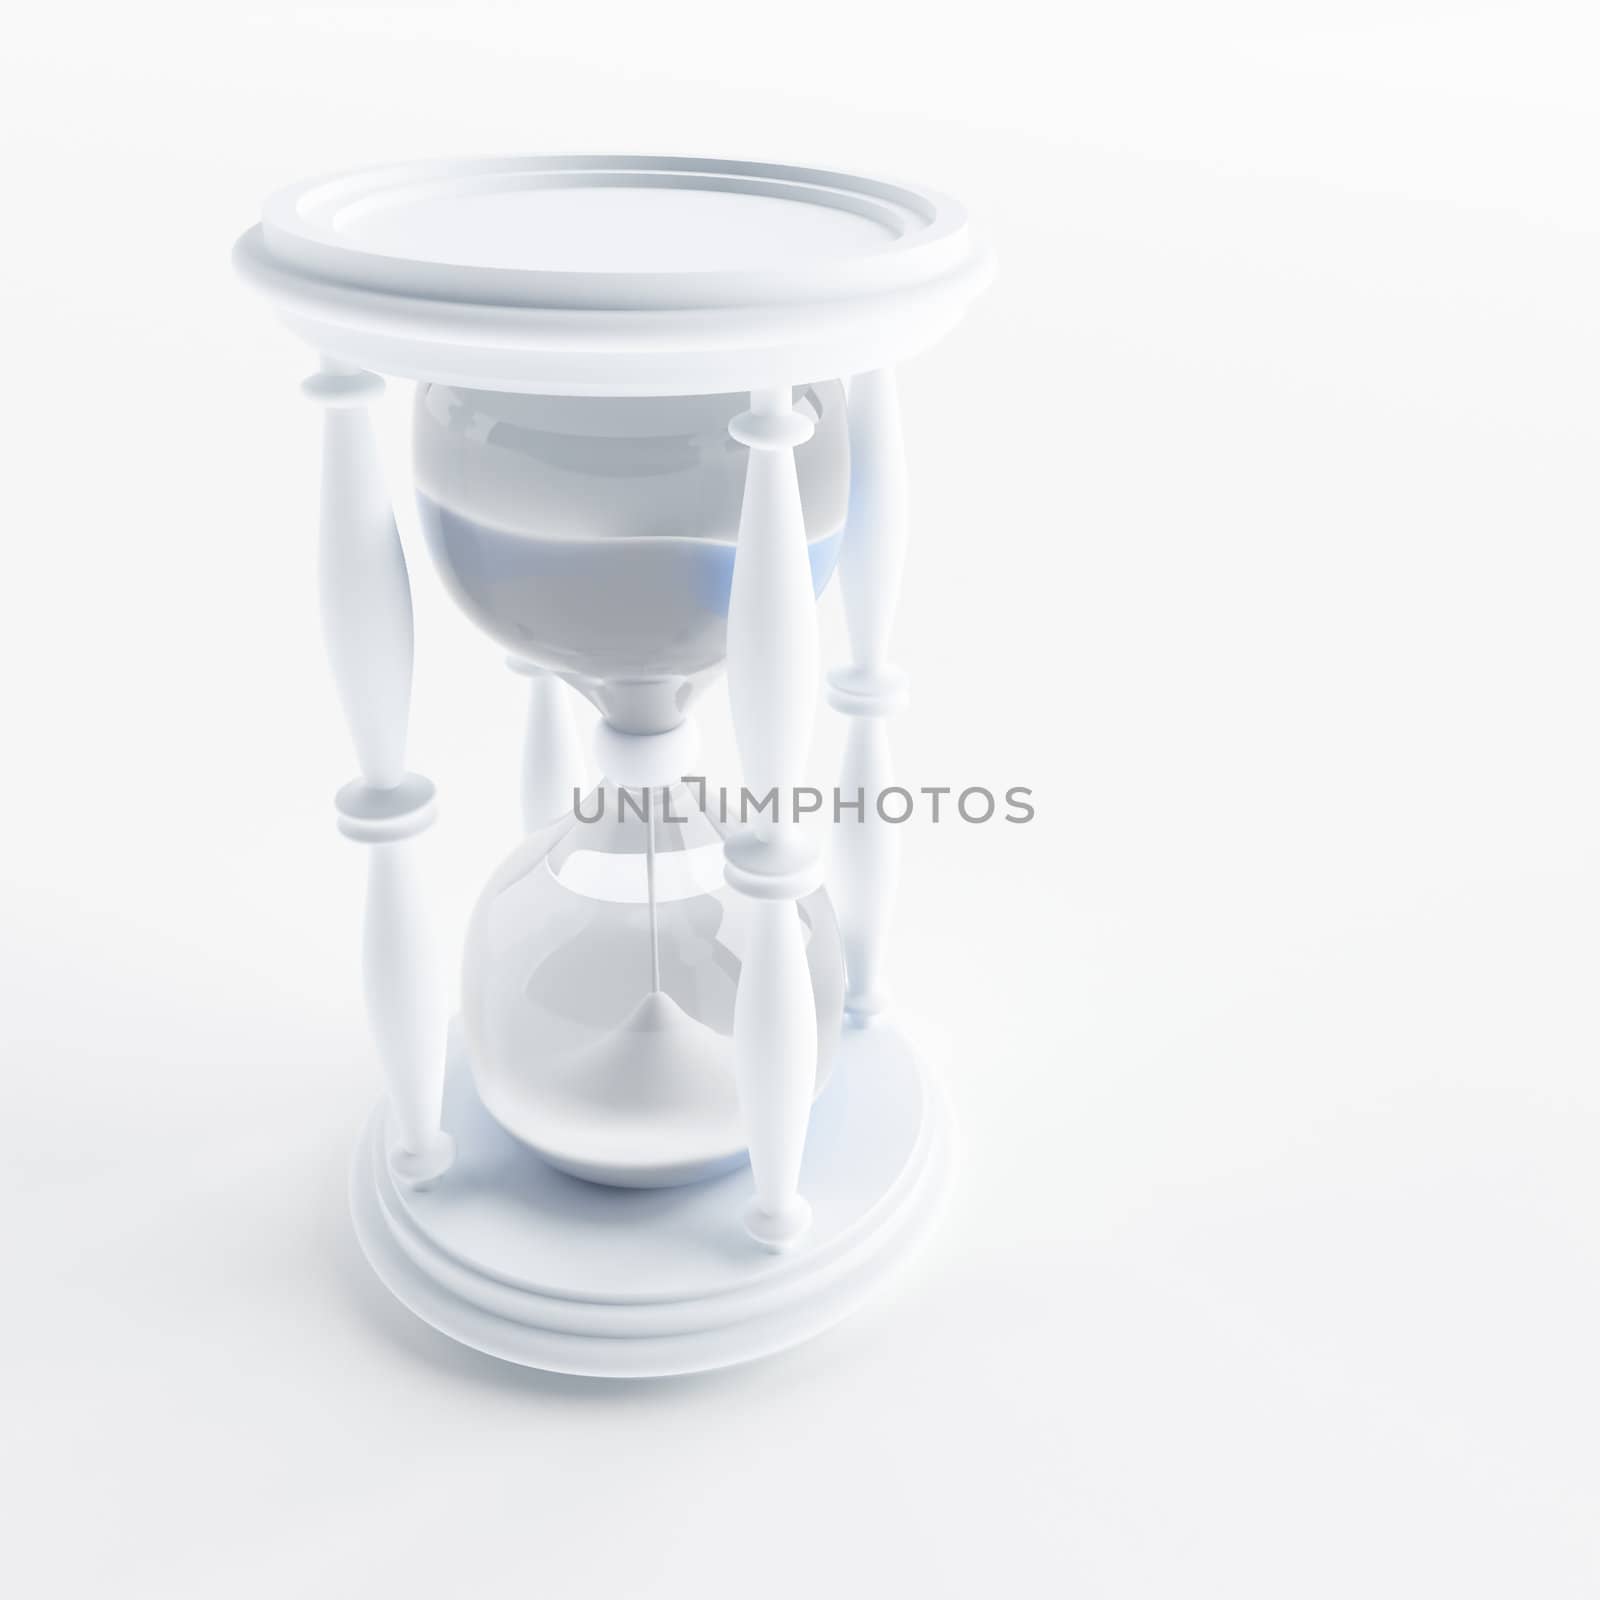 Sand-glass counts time on a white background